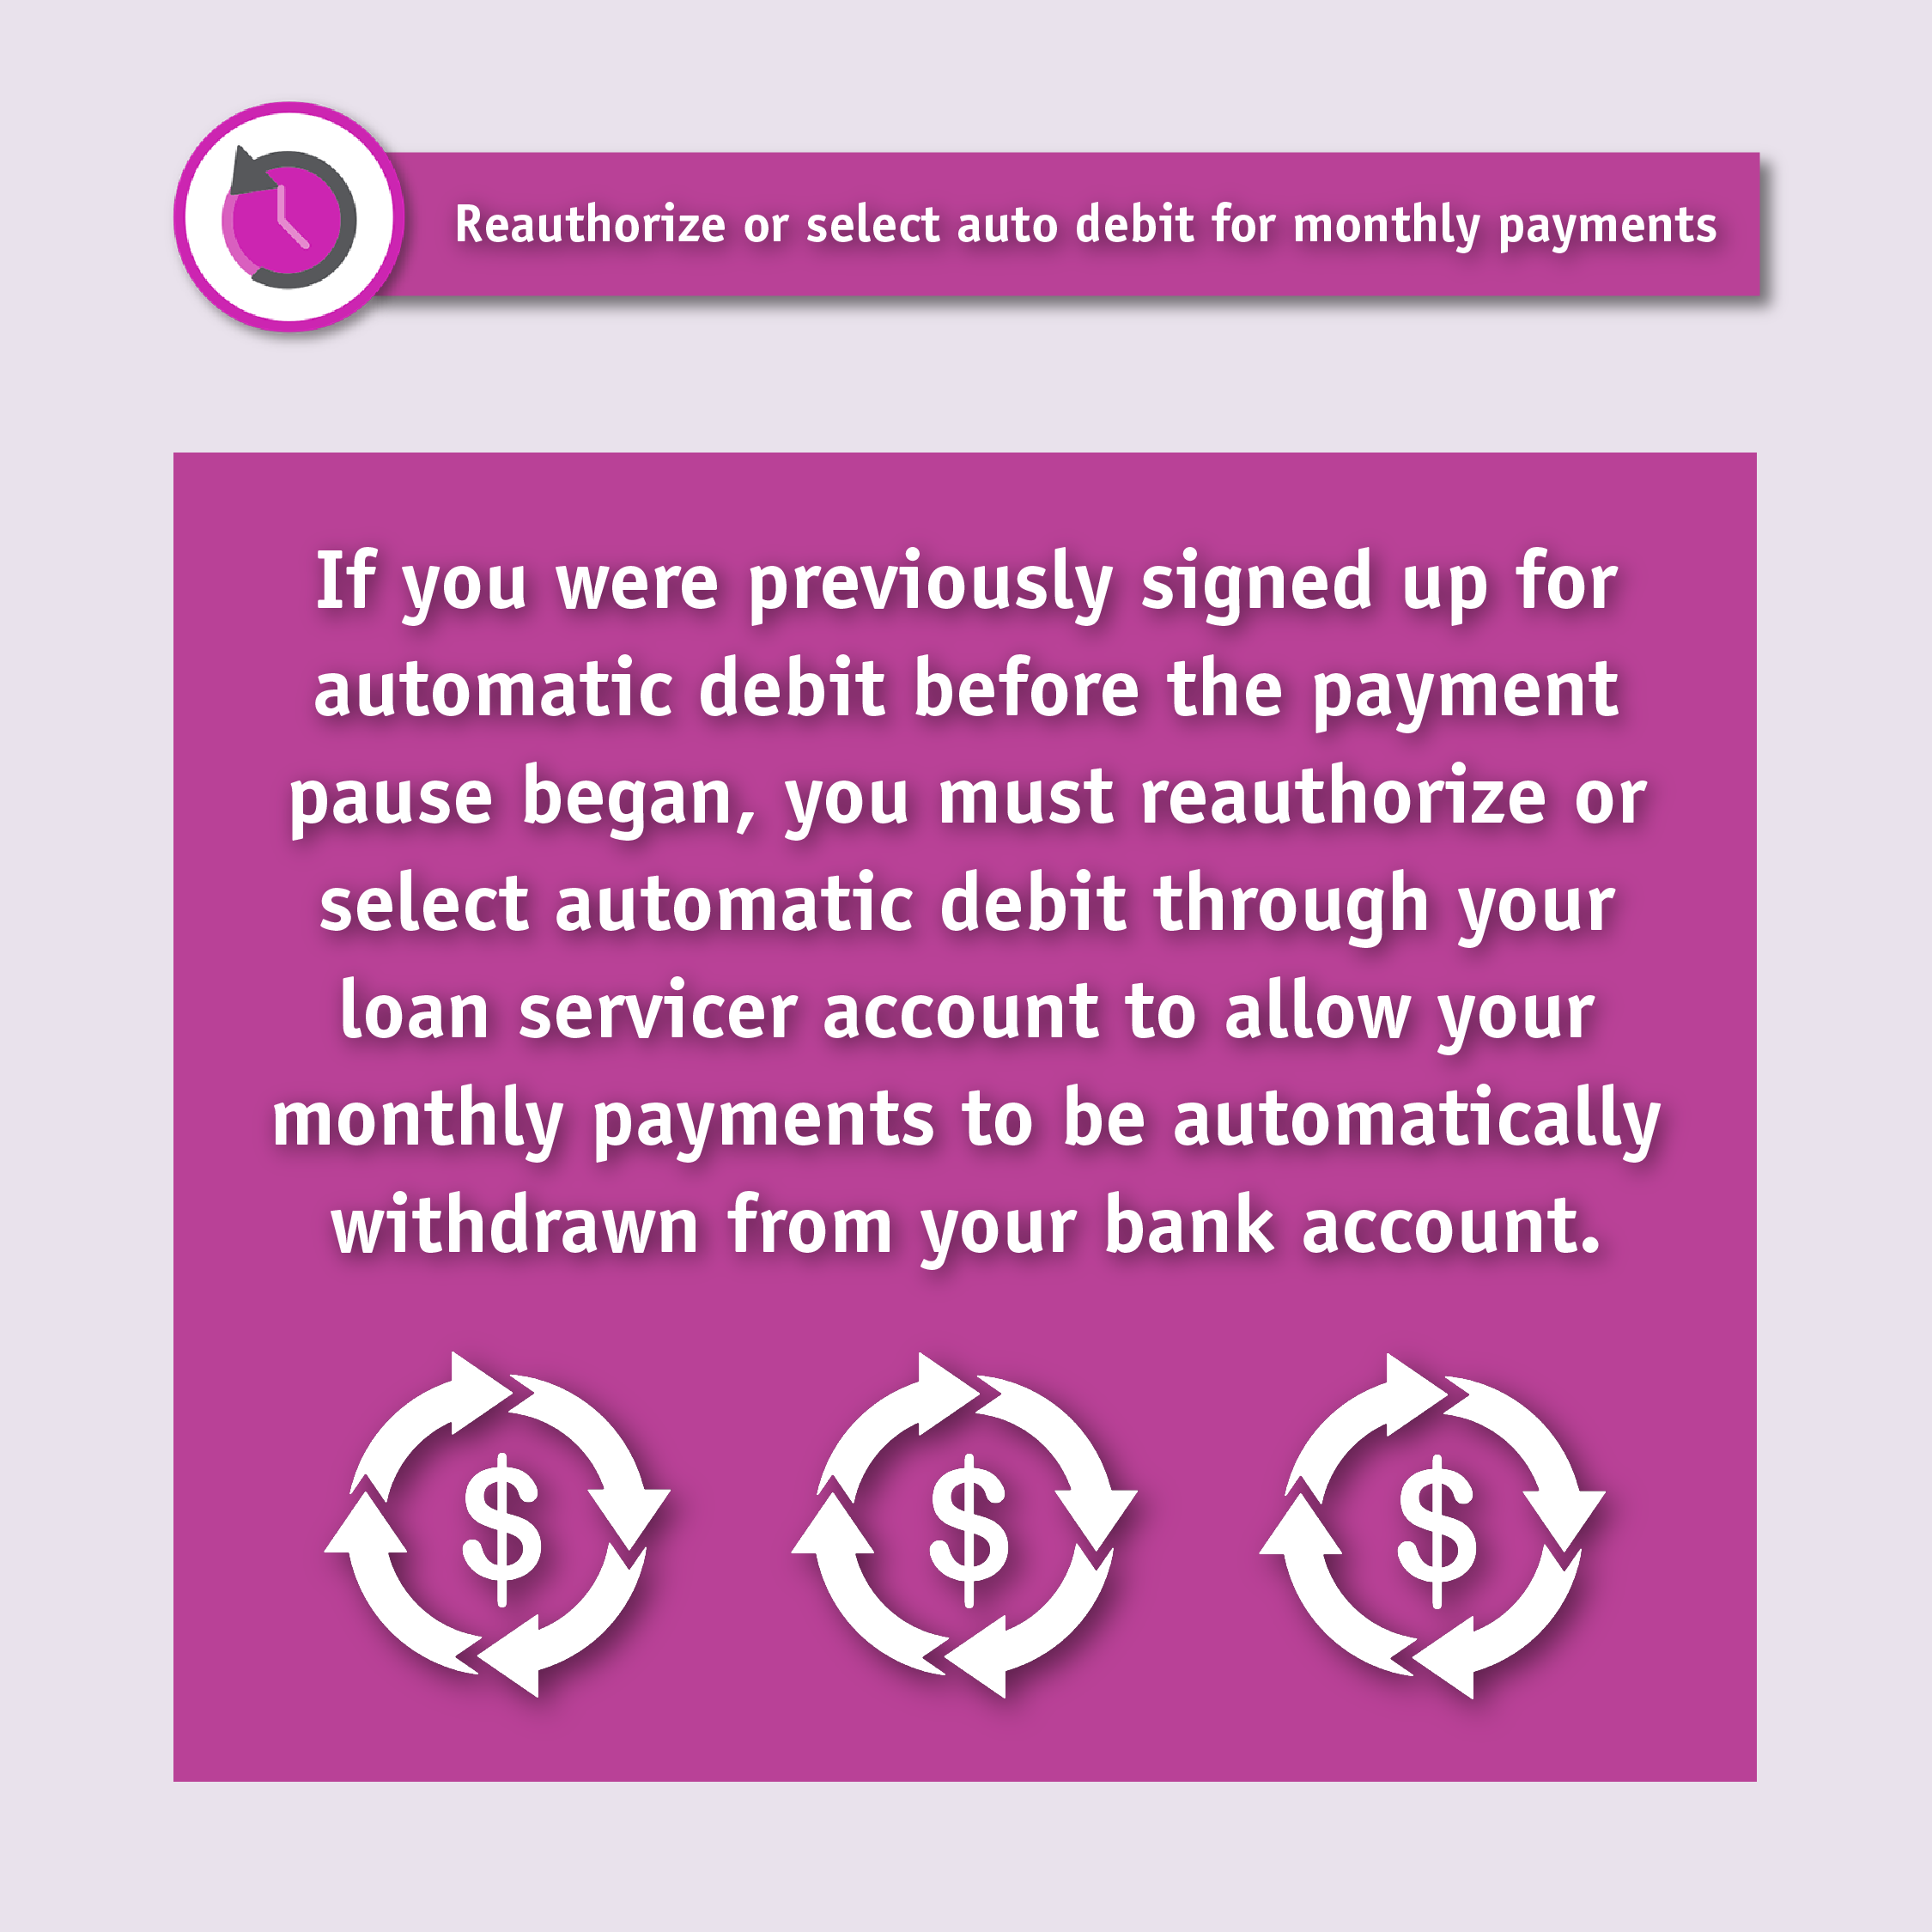 Reauthorize or select auto debit for monthly payments. If you were previously signed up for automatic debit before the payment pause began, you must reauthorize or select automatic debit through your loan servicer account to allow your monthly payments to be automatically withdrawn from your bank account.